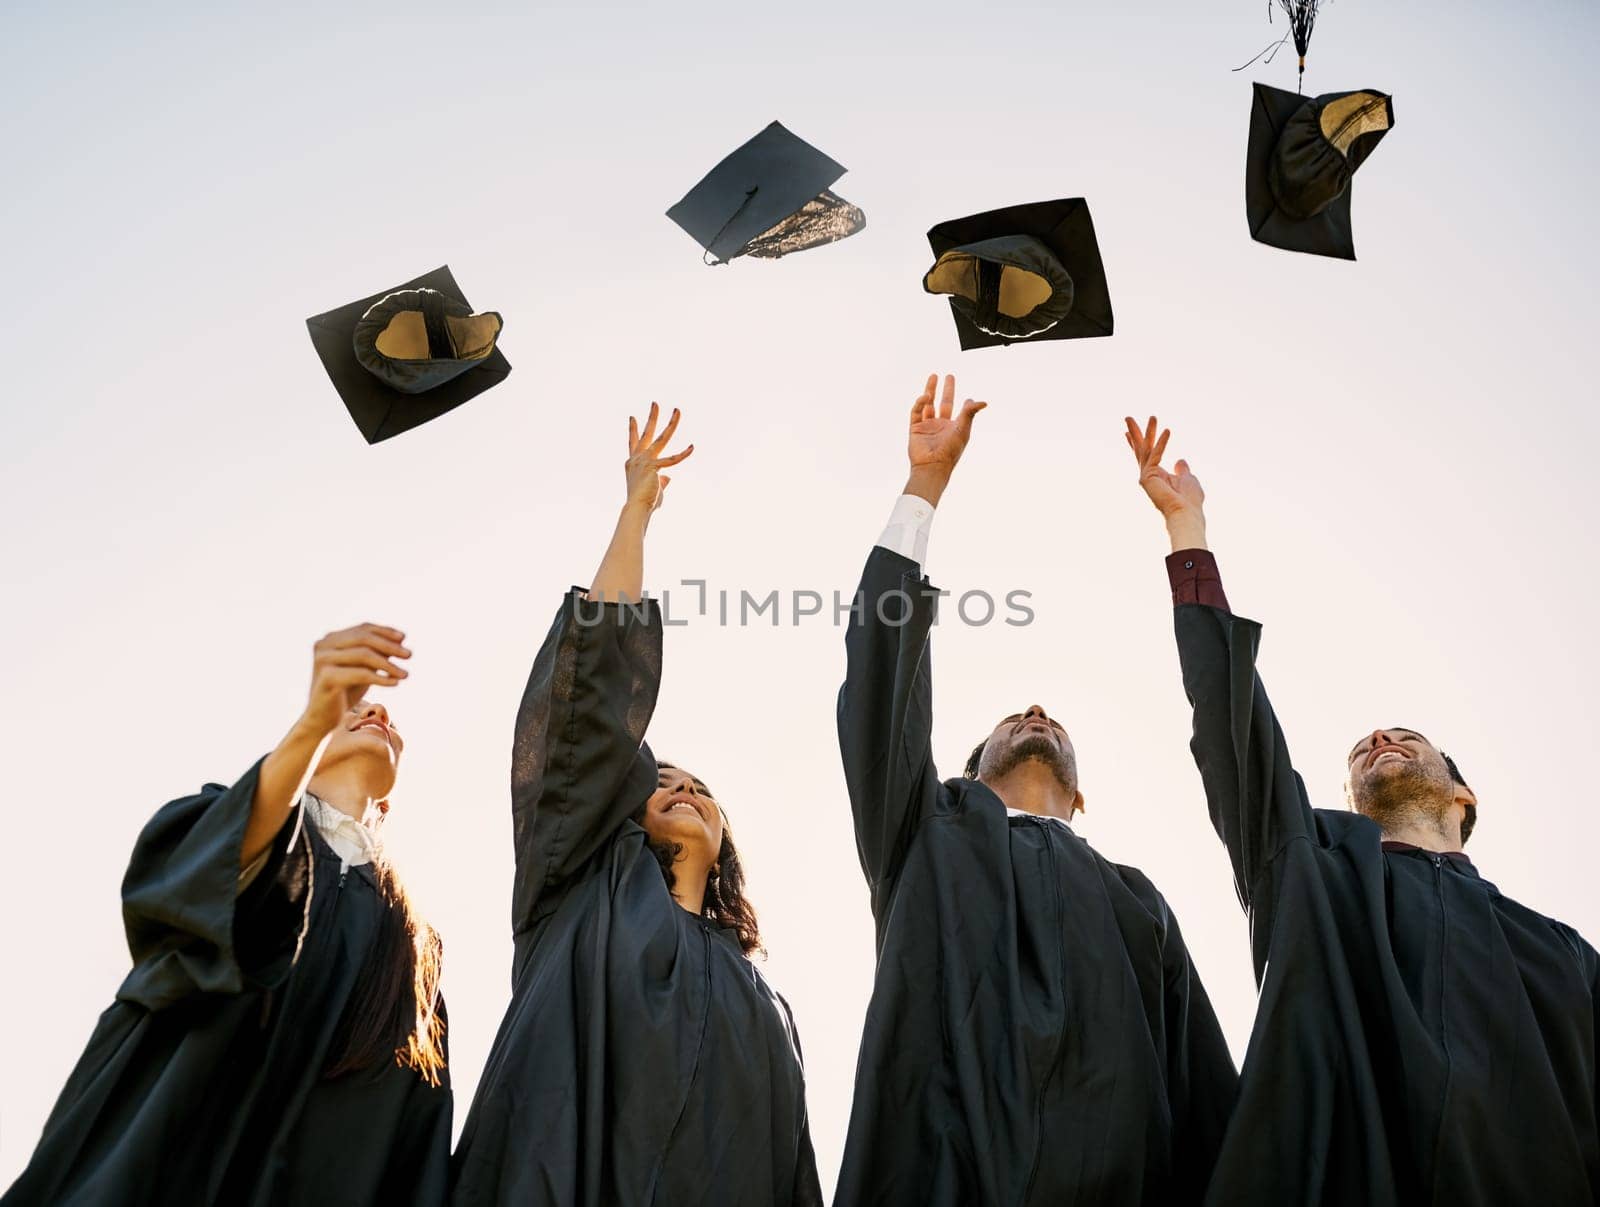 Even if its tough, you can still triumph. a group of students throwing their hats in the air on graduation day. by YuriArcurs